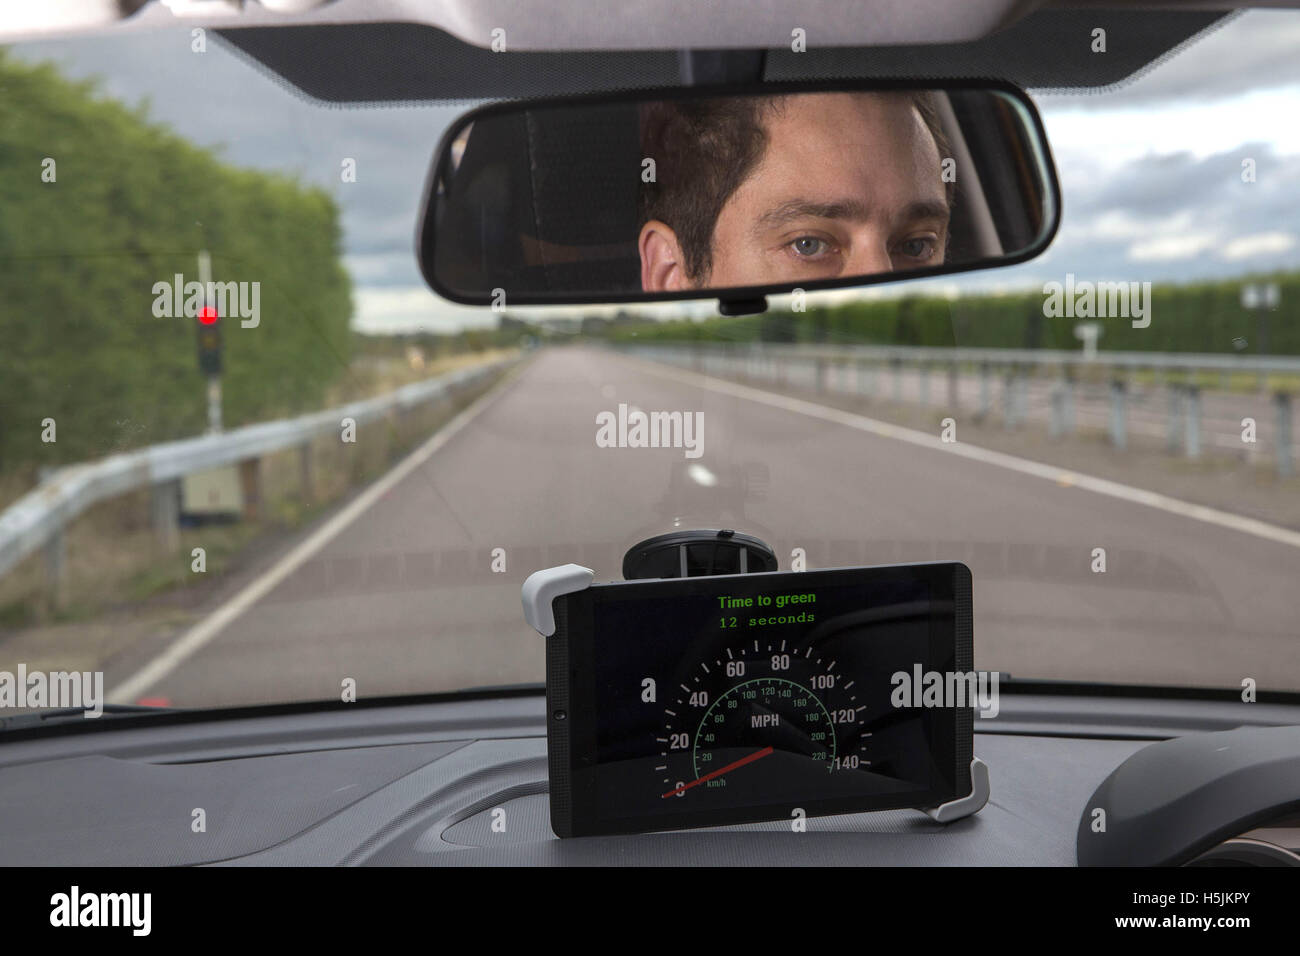 Chris Burbridge, Autonomous Driving Software Engineer for Tata Motors European Technical Centre, demonstrates the car manufacturer's GLOSA V2X functionality, which is connected to the traffic lights and shares information with the driver, during the first demonstrations of the UK Autodrive Project at HORIBA MIRA Proving Ground in Nuneaton, Warwickshire. Stock Photo